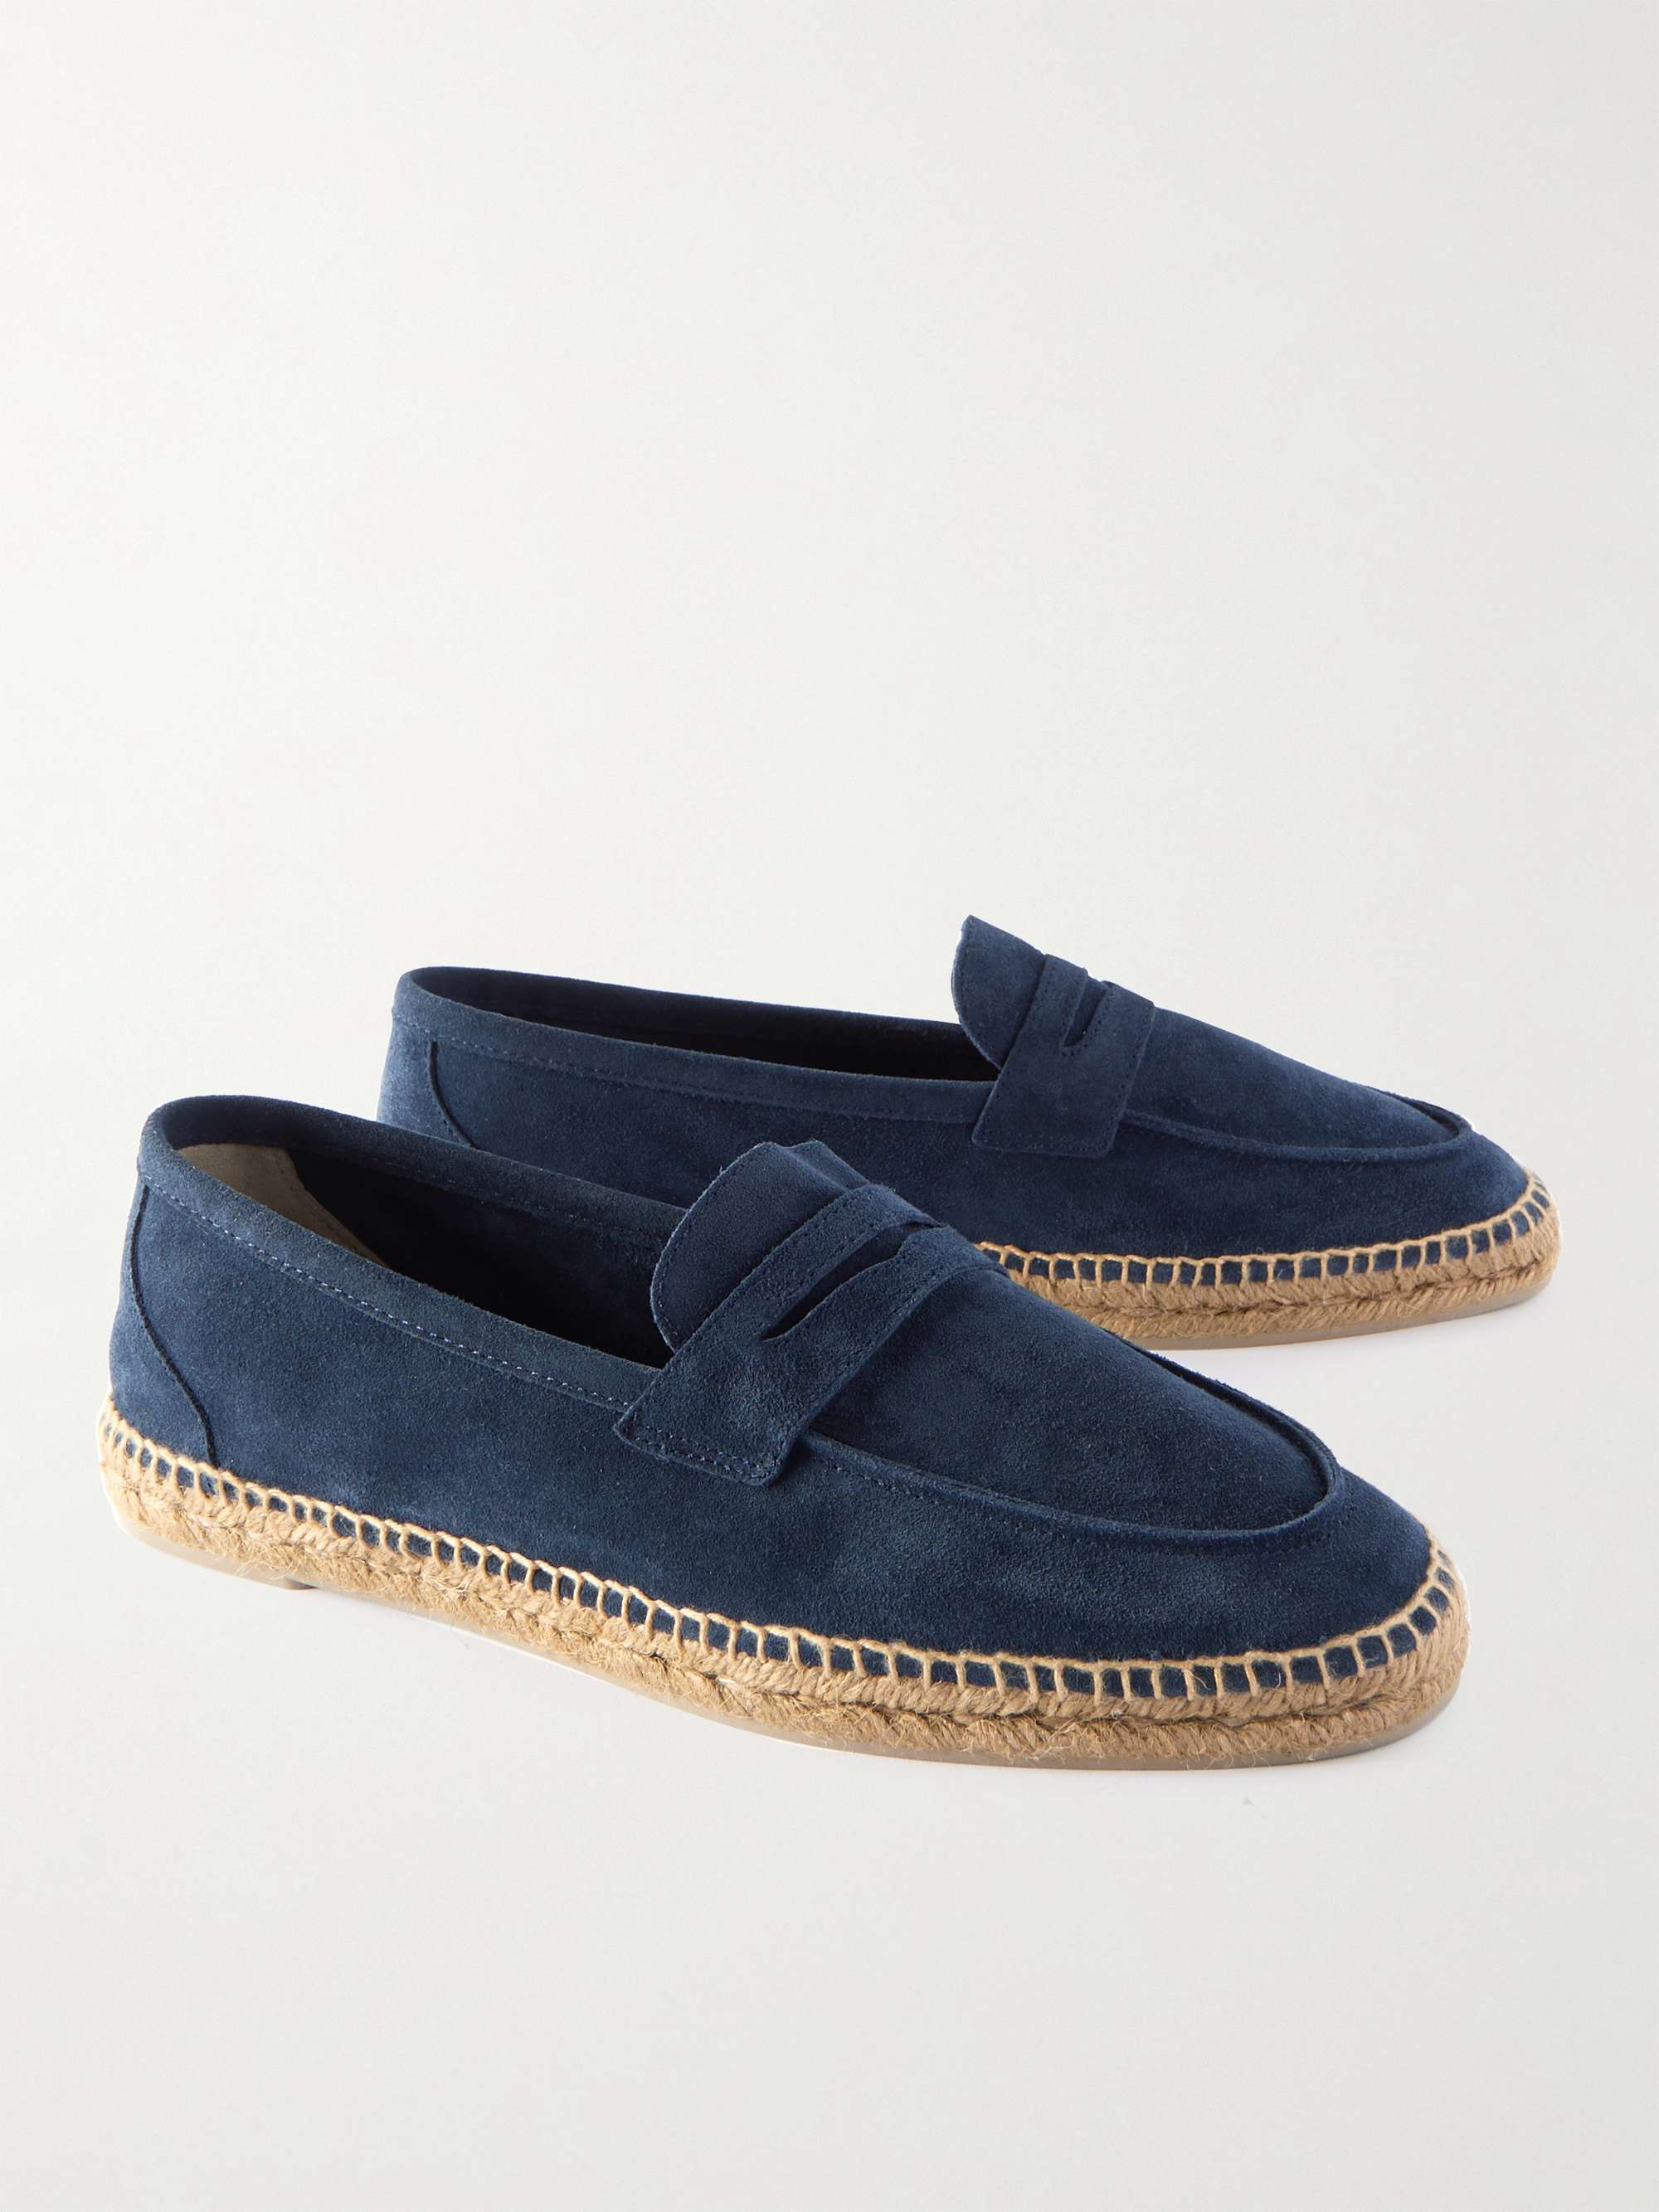 Save 22% Castañer Nacho Suede Espadrille Loafers in Blue for Men Mens Shoes Slip-on shoes Espadrille shoes and sandals 